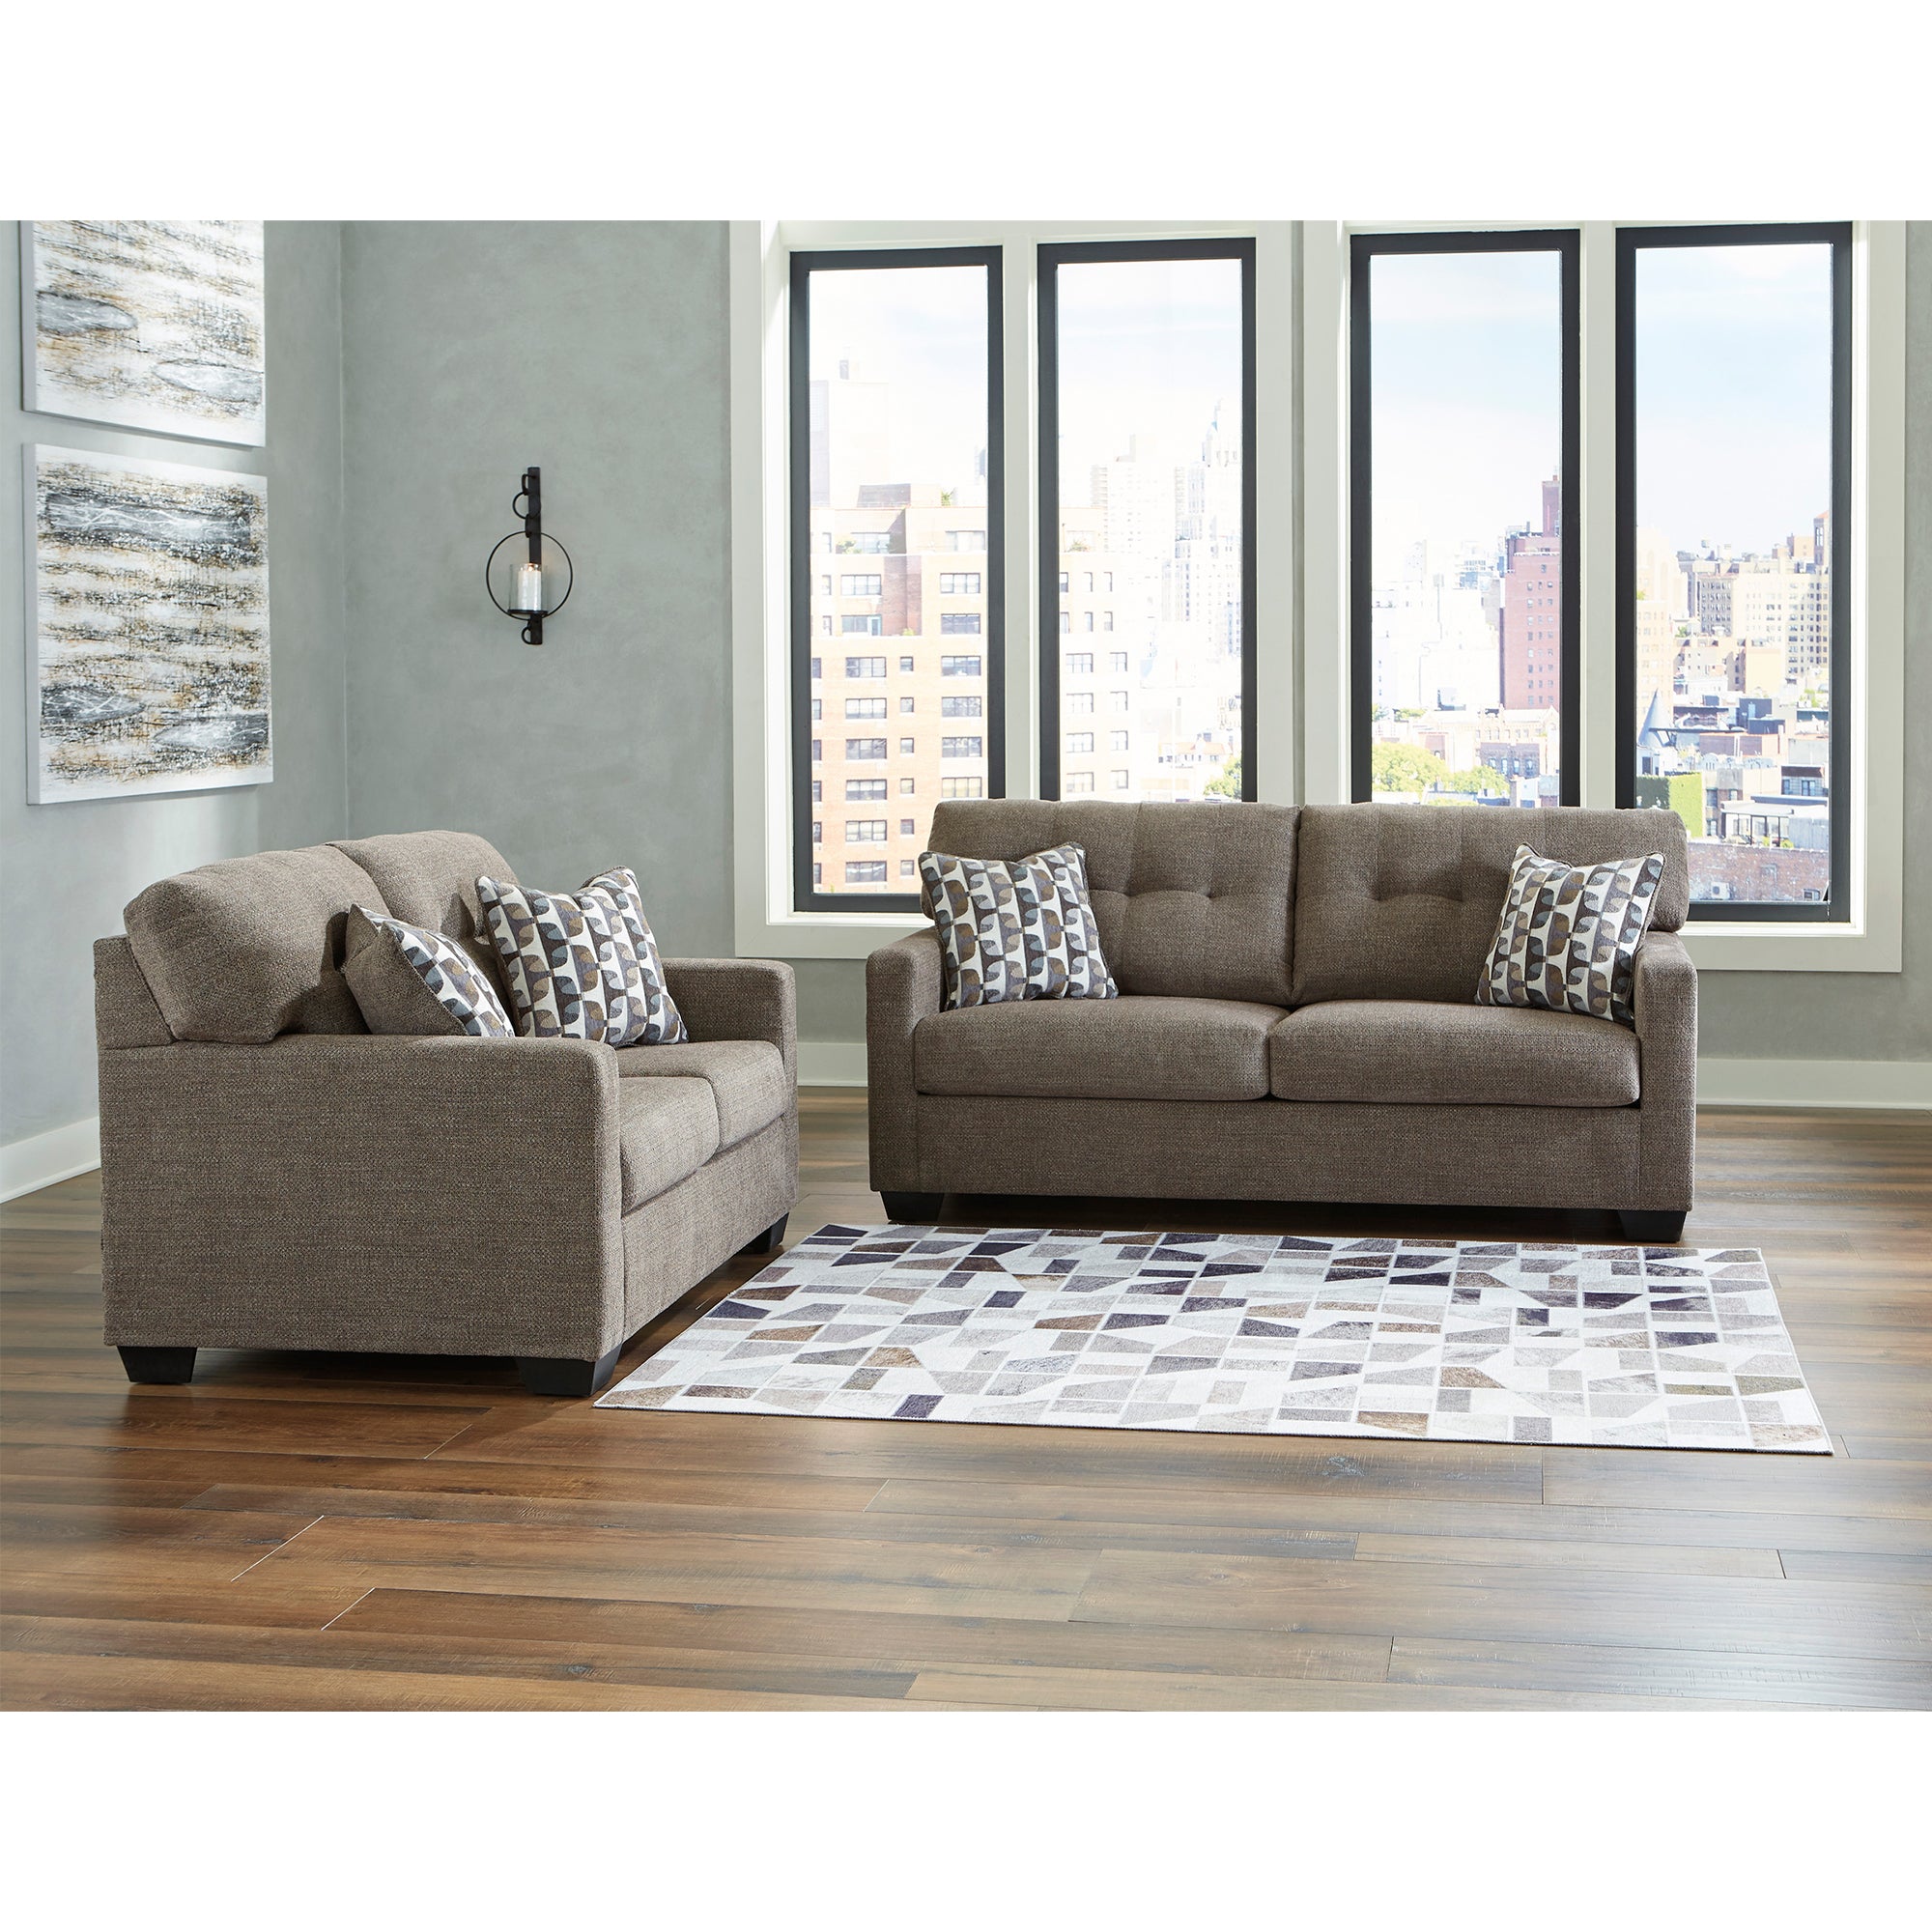 Luxurious chocolate-colored Mahoney Sofa and Loveseat, ideal for comfortable and stylish home interiors